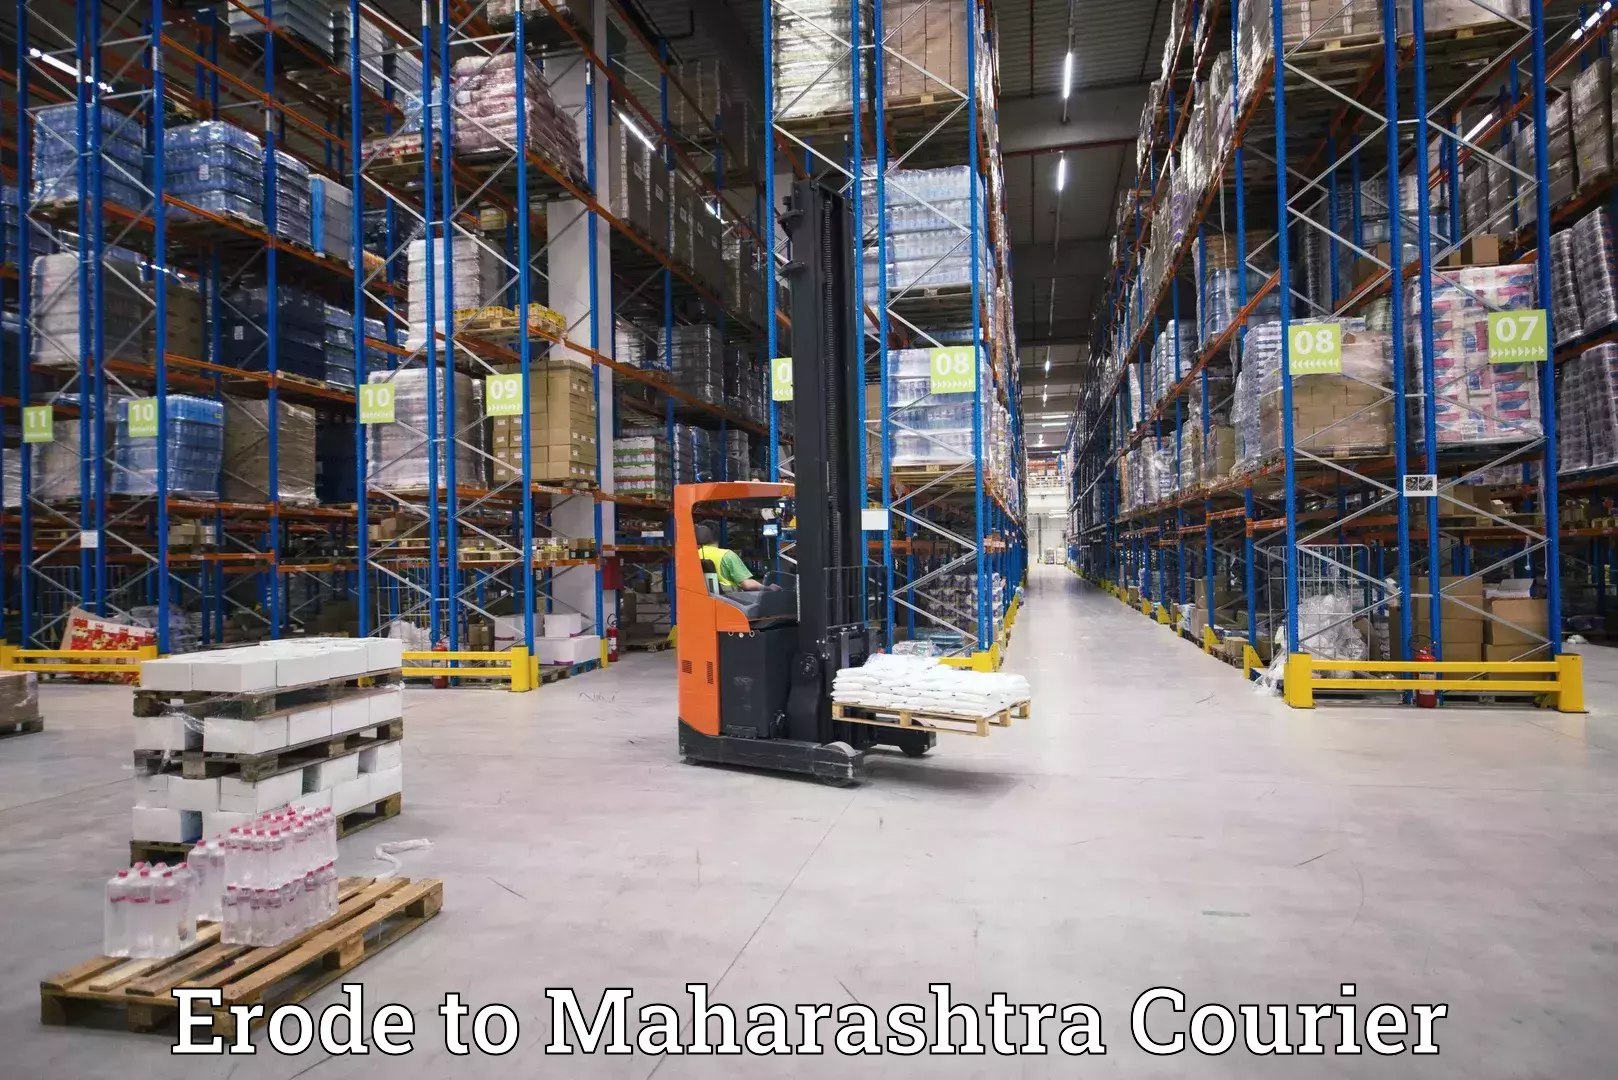 Customer-focused courier in Erode to Mhaswad